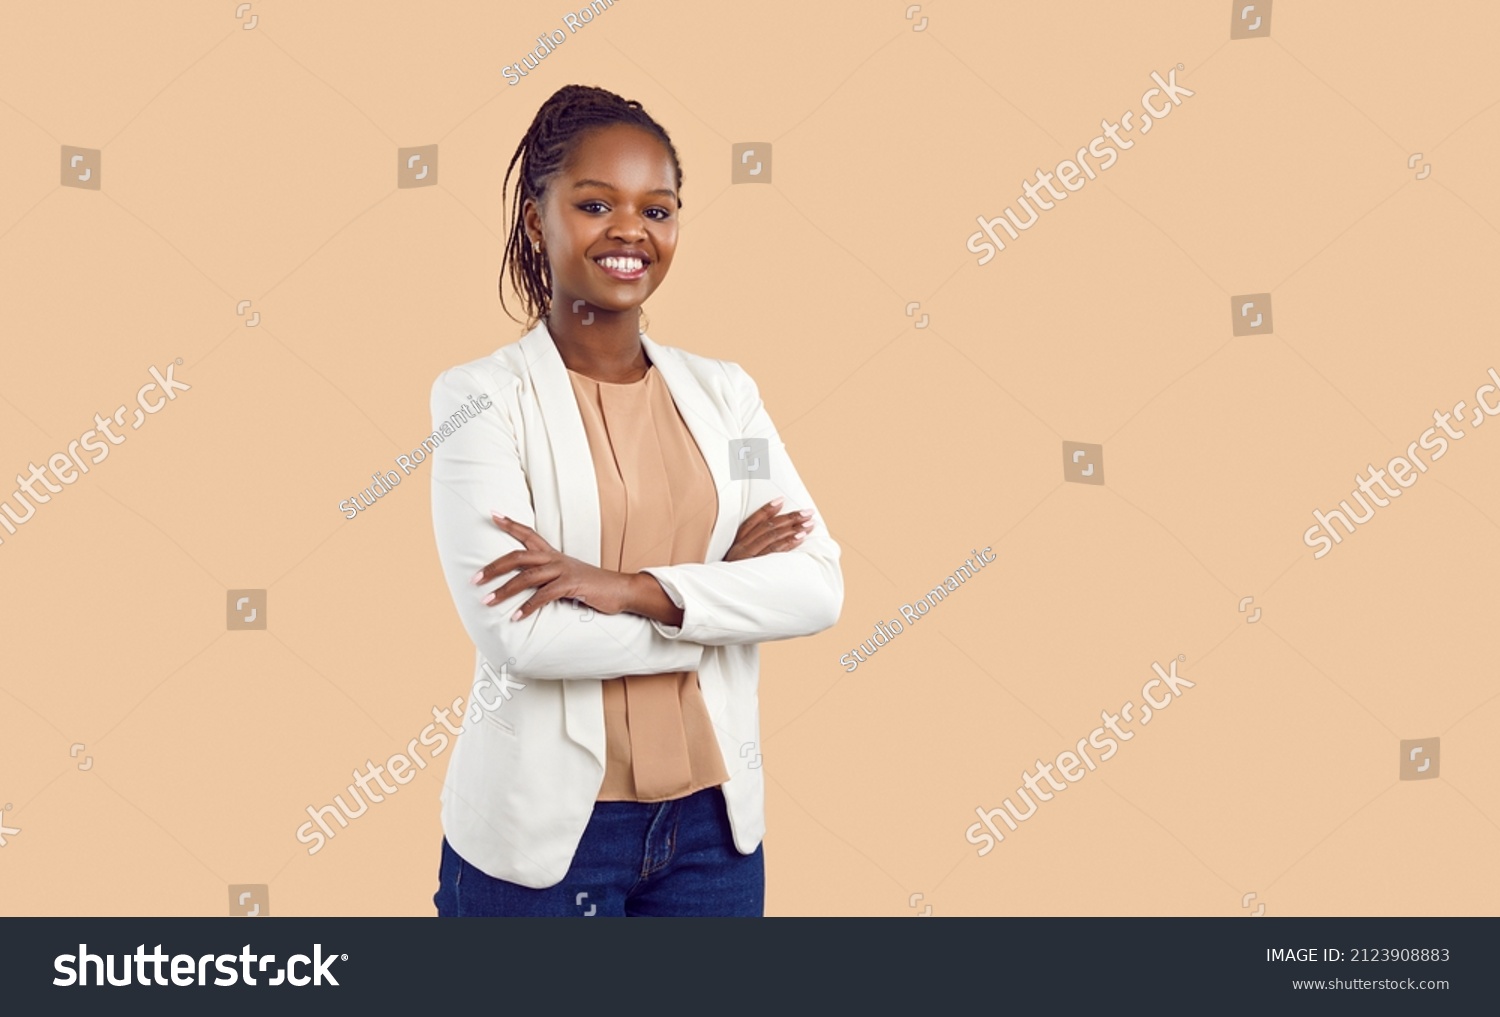 Studio portrait of happy successful confident black business woman. Beautiful young lady in white jacket smiling at camera standing isolated on blank solid beige colour copyspace background #2123908883